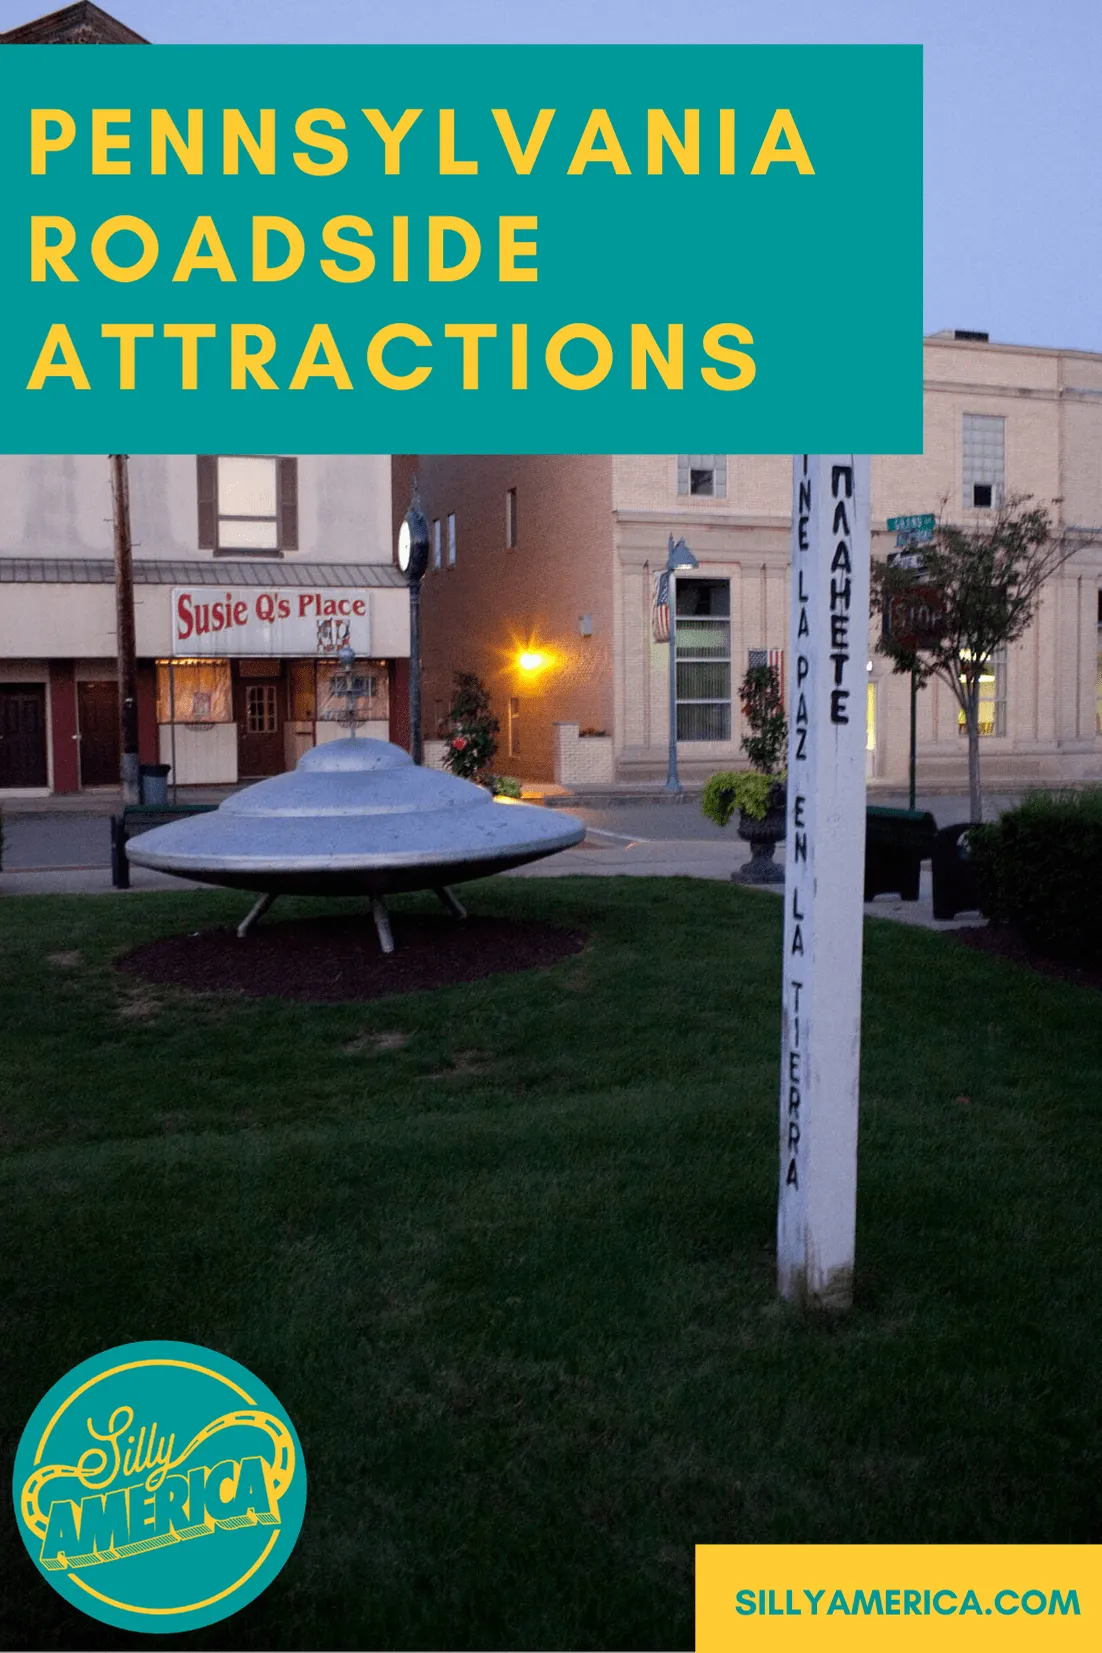 The best Pennsylvania roadside attractions to visit on a Pennsylvania road trip. Add these roadside oddities to your travel bucket list, itinerary, or map! Weird roadside attractions and road trip stops for kids or adults! #PennsylvaniaRoadsideAttractions #PennsylvaniaRoadsideAttraction #RoadsideAttractions #RoadsideAttraction #RoadTrip #PennsylvaniaRoadTrip #PennsylvaniaRoadTripWithKids #PennsylvaniaRoadTripBucketLists #PennsylvaniaBucketList #WeirdRoadsideAttractions